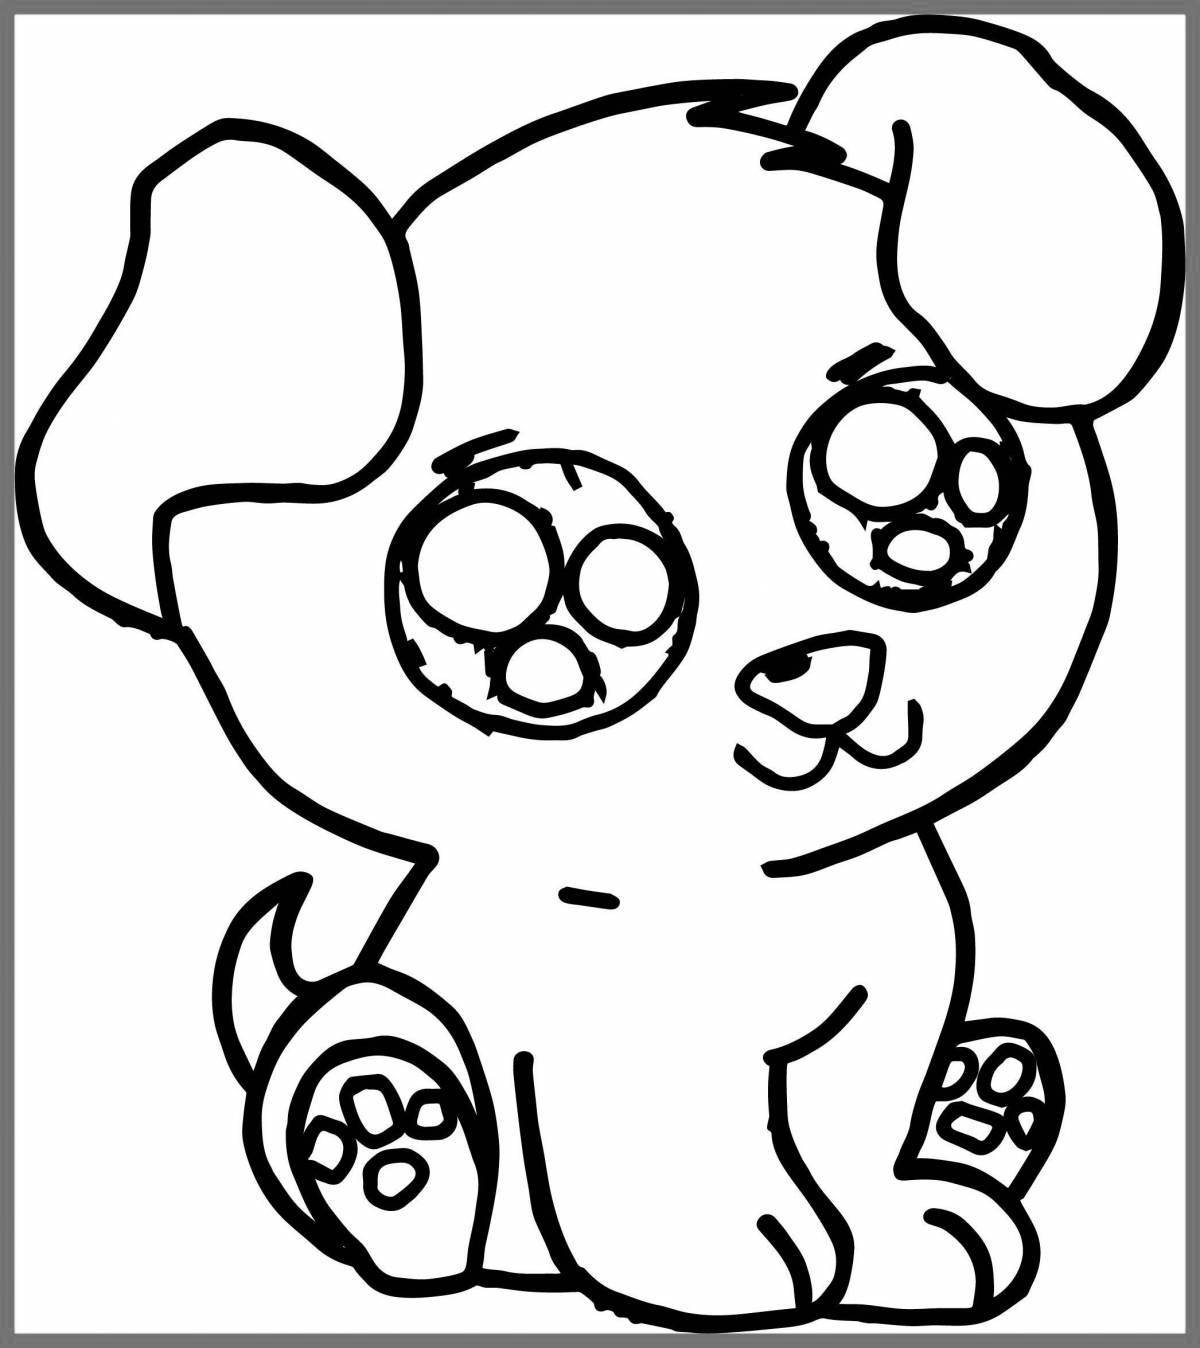 Fluffy puppy coloring pages for girls